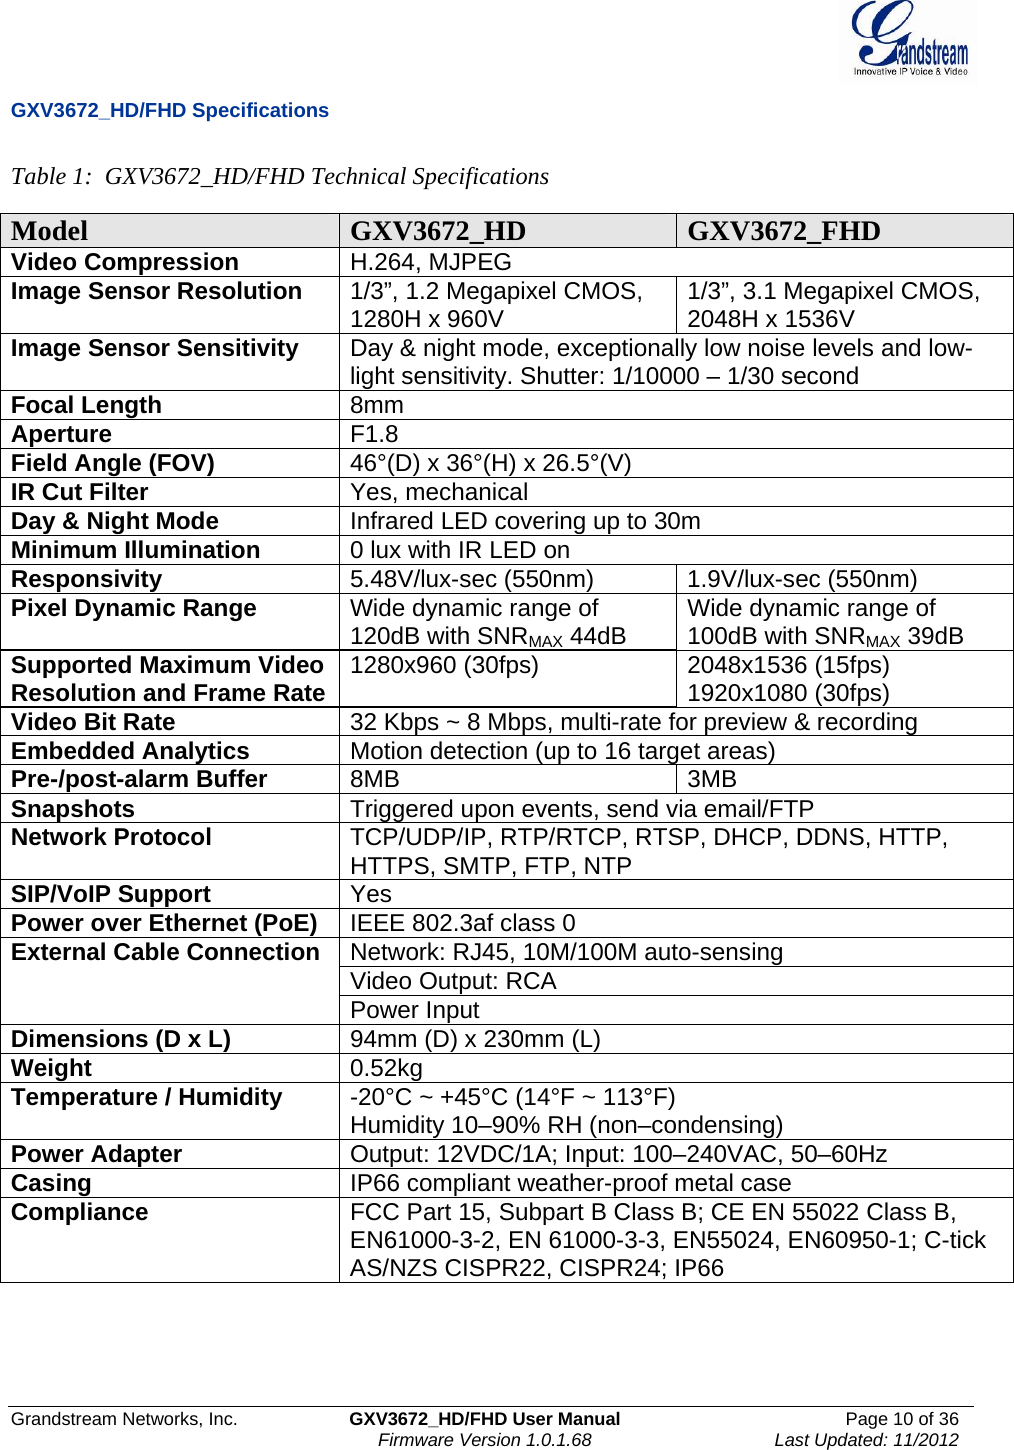  Grandstream Networks, Inc.  GXV3672_HD/FHD User Manual  Page 10 of 36    Firmware Version 1.0.1.68  Last Updated: 11/2012  GXV3672_HD/FHD Specifications  Table 1:  GXV3672_HD/FHD Technical Specifications  Model GXV3672_HD   GXV3672_FHD  Video Compression  H.264, MJPEG Image Sensor Resolution  1/3”, 1.2 Megapixel CMOS, 1280H x 960V  1/3”, 3.1 Megapixel CMOS, 2048H x 1536V  Image Sensor Sensitivity  Day &amp; night mode, exceptionally low noise levels and low-light sensitivity. Shutter: 1/10000 – 1/30 second  Focal Length 8mm Aperture F1.8 Field Angle (FOV)  46°(D) x 36°(H) x 26.5°(V) IR Cut Filter Yes, mechanical Day &amp; Night Mode Infrared LED covering up to 30m Minimum Illumination   0 lux with IR LED on Responsivity   5.48V/lux-sec (550nm)   1.9V/lux-sec (550nm) Pixel Dynamic Range  Wide dynamic range of 120dB with SNRMAX 44dB  Wide dynamic range of 100dB with SNRMAX 39dB Supported Maximum Video Resolution and Frame Rate 1280x960 (30fps)  2048x1536 (15fps) 1920x1080 (30fps) Video Bit Rate   32 Kbps ~ 8 Mbps, multi-rate for preview &amp; recording Embedded Analytics   Motion detection (up to 16 target areas) Pre-/post-alarm Buffer  8MB  3MB Snapshots   Triggered upon events, send via email/FTP  Network Protocol   TCP/UDP/IP, RTP/RTCP, RTSP, DHCP, DDNS, HTTP, HTTPS, SMTP, FTP, NTP SIP/VoIP Support  Yes Power over Ethernet (PoE)   IEEE 802.3af class 0 Network: RJ45, 10M/100M auto-sensing Video Output: RCA External Cable Connection Power Input Dimensions (D x L)   94mm (D) x 230mm (L) Weight  0.52kg Temperature / Humidity   -20°C ~ +45°C (14°F ~ 113°F) Humidity 10–90% RH (non–condensing)  Power Adapter   Output: 12VDC/1A; Input: 100–240VAC, 50–60Hz  Casing   IP66 compliant weather-proof metal case Compliance   FCC Part 15, Subpart B Class B; CE EN 55022 Class B, EN61000-3-2, EN 61000-3-3, EN55024, EN60950-1; C-tick AS/NZS CISPR22, CISPR24; IP66  